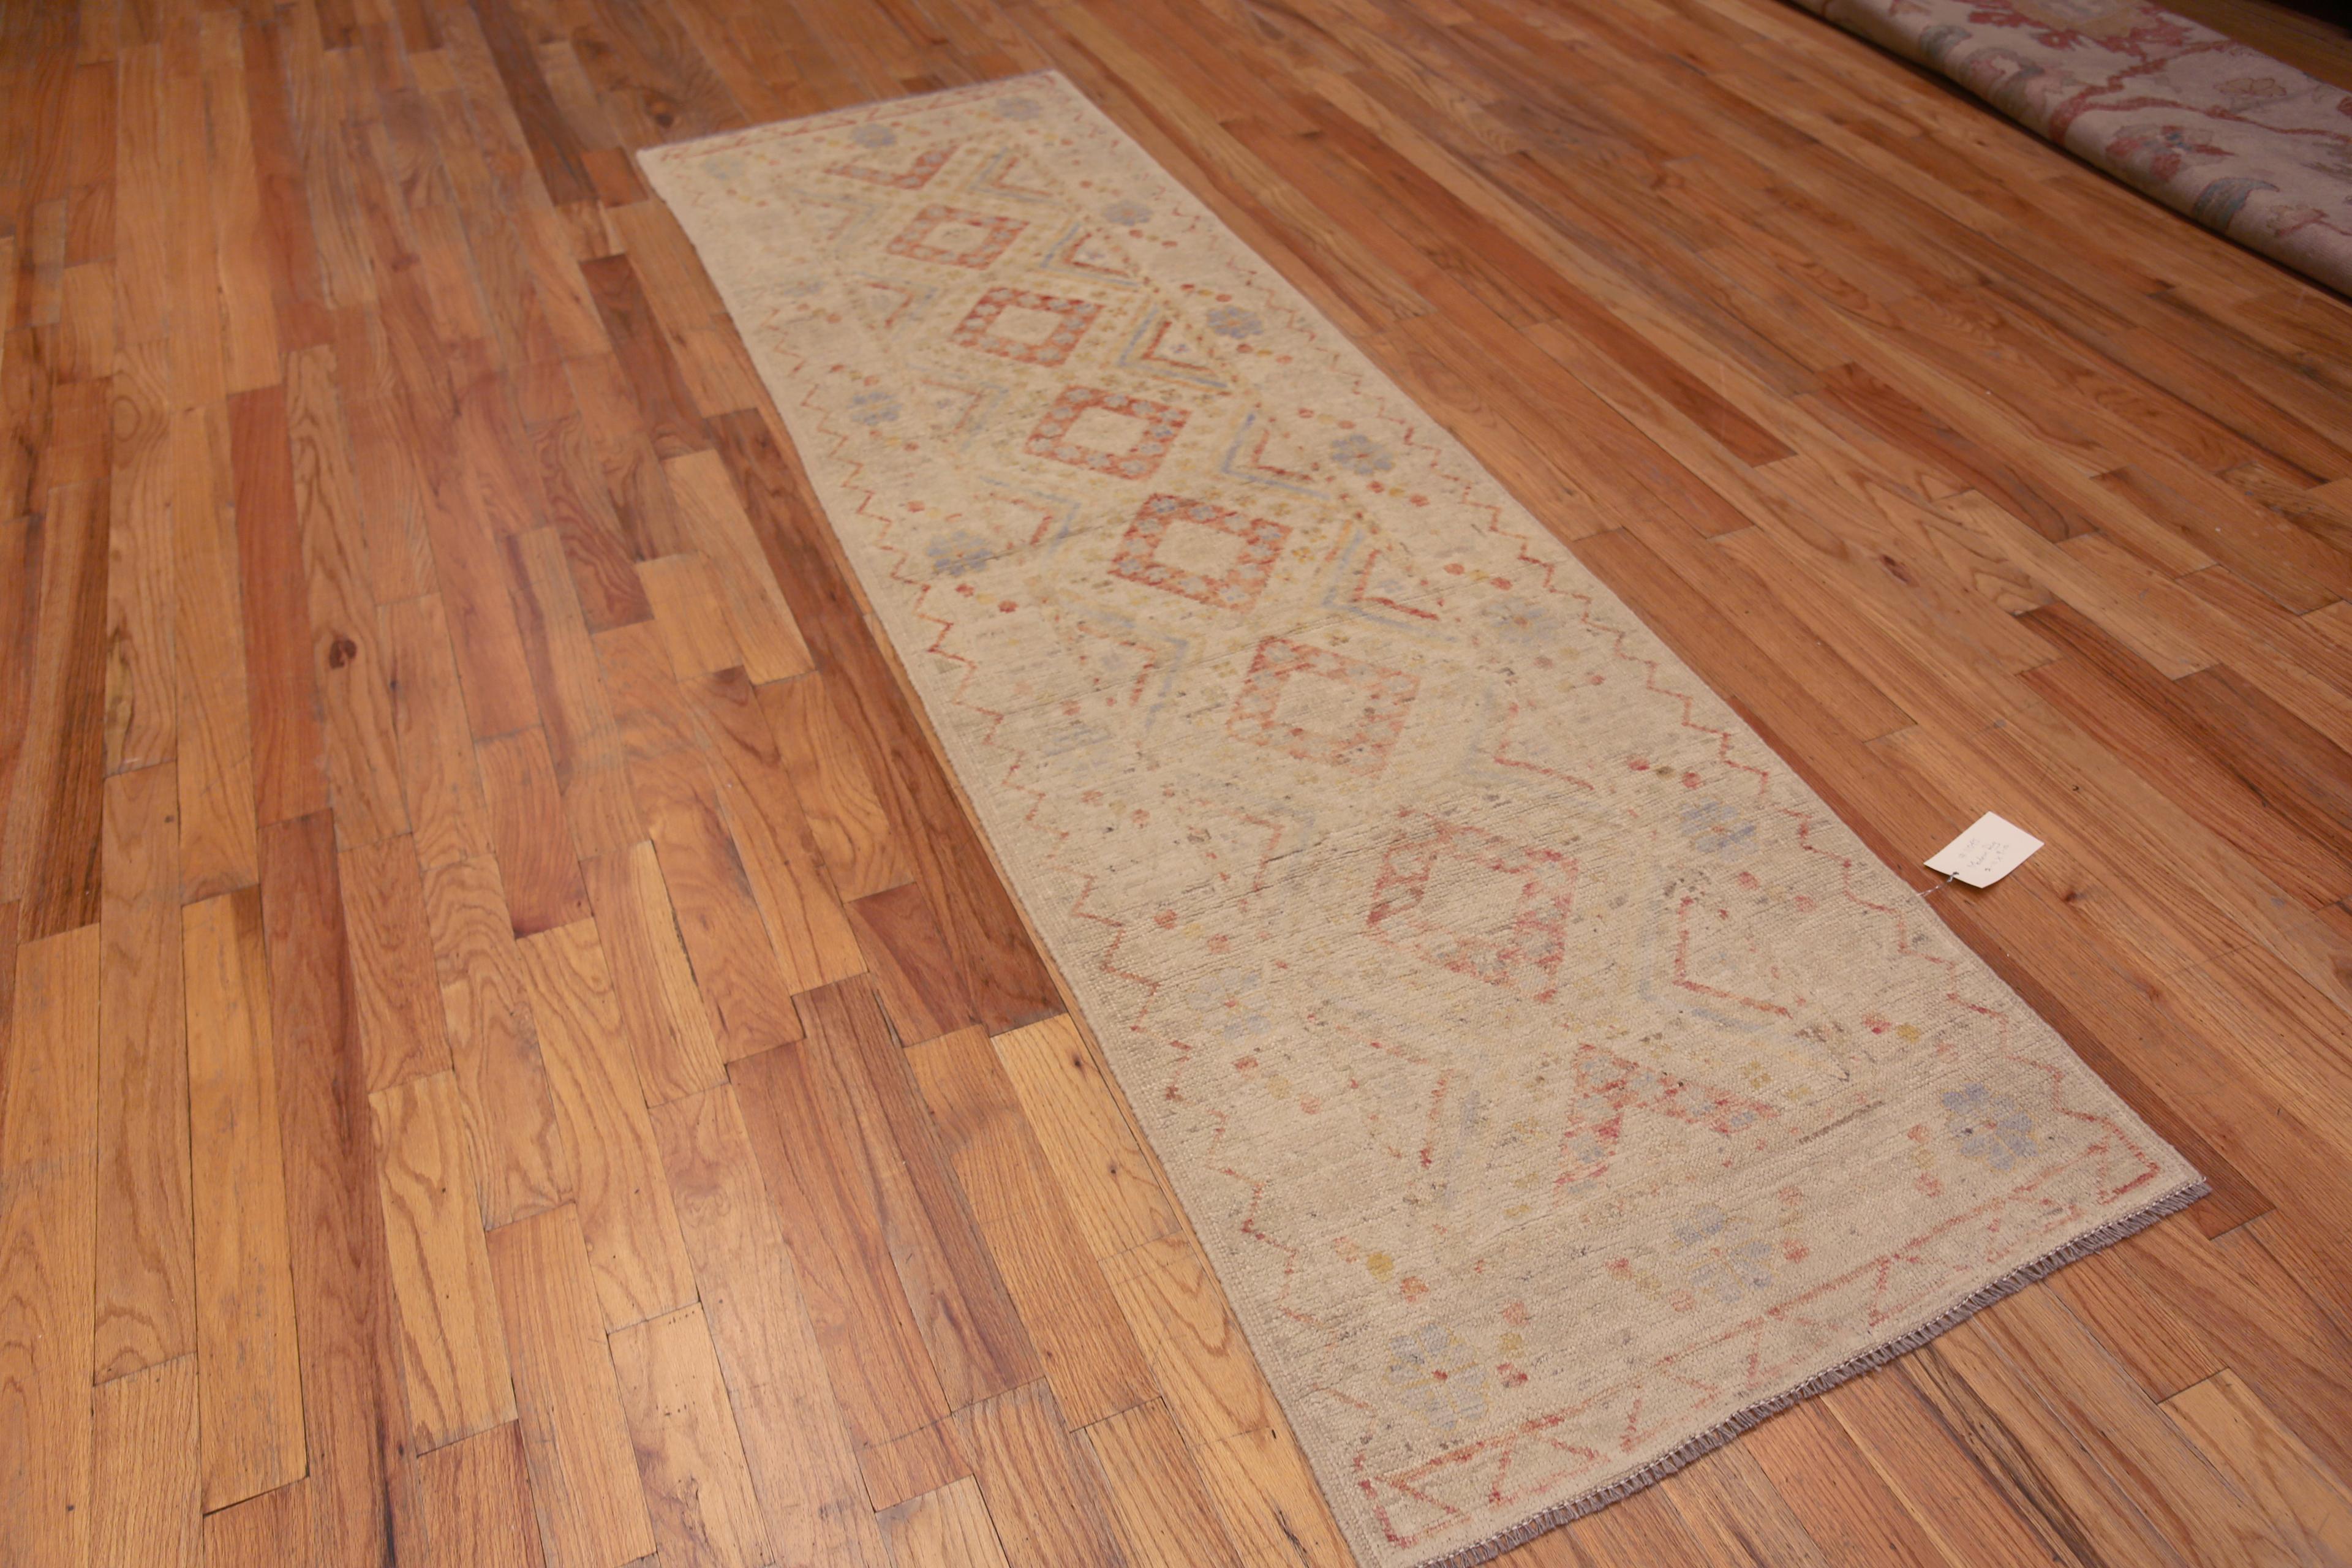 Gorgeous Abstract Folk Art Contemporary Central Asian Area Rug, Country of Origin: Central Asia, Circa date: Modern Rugs